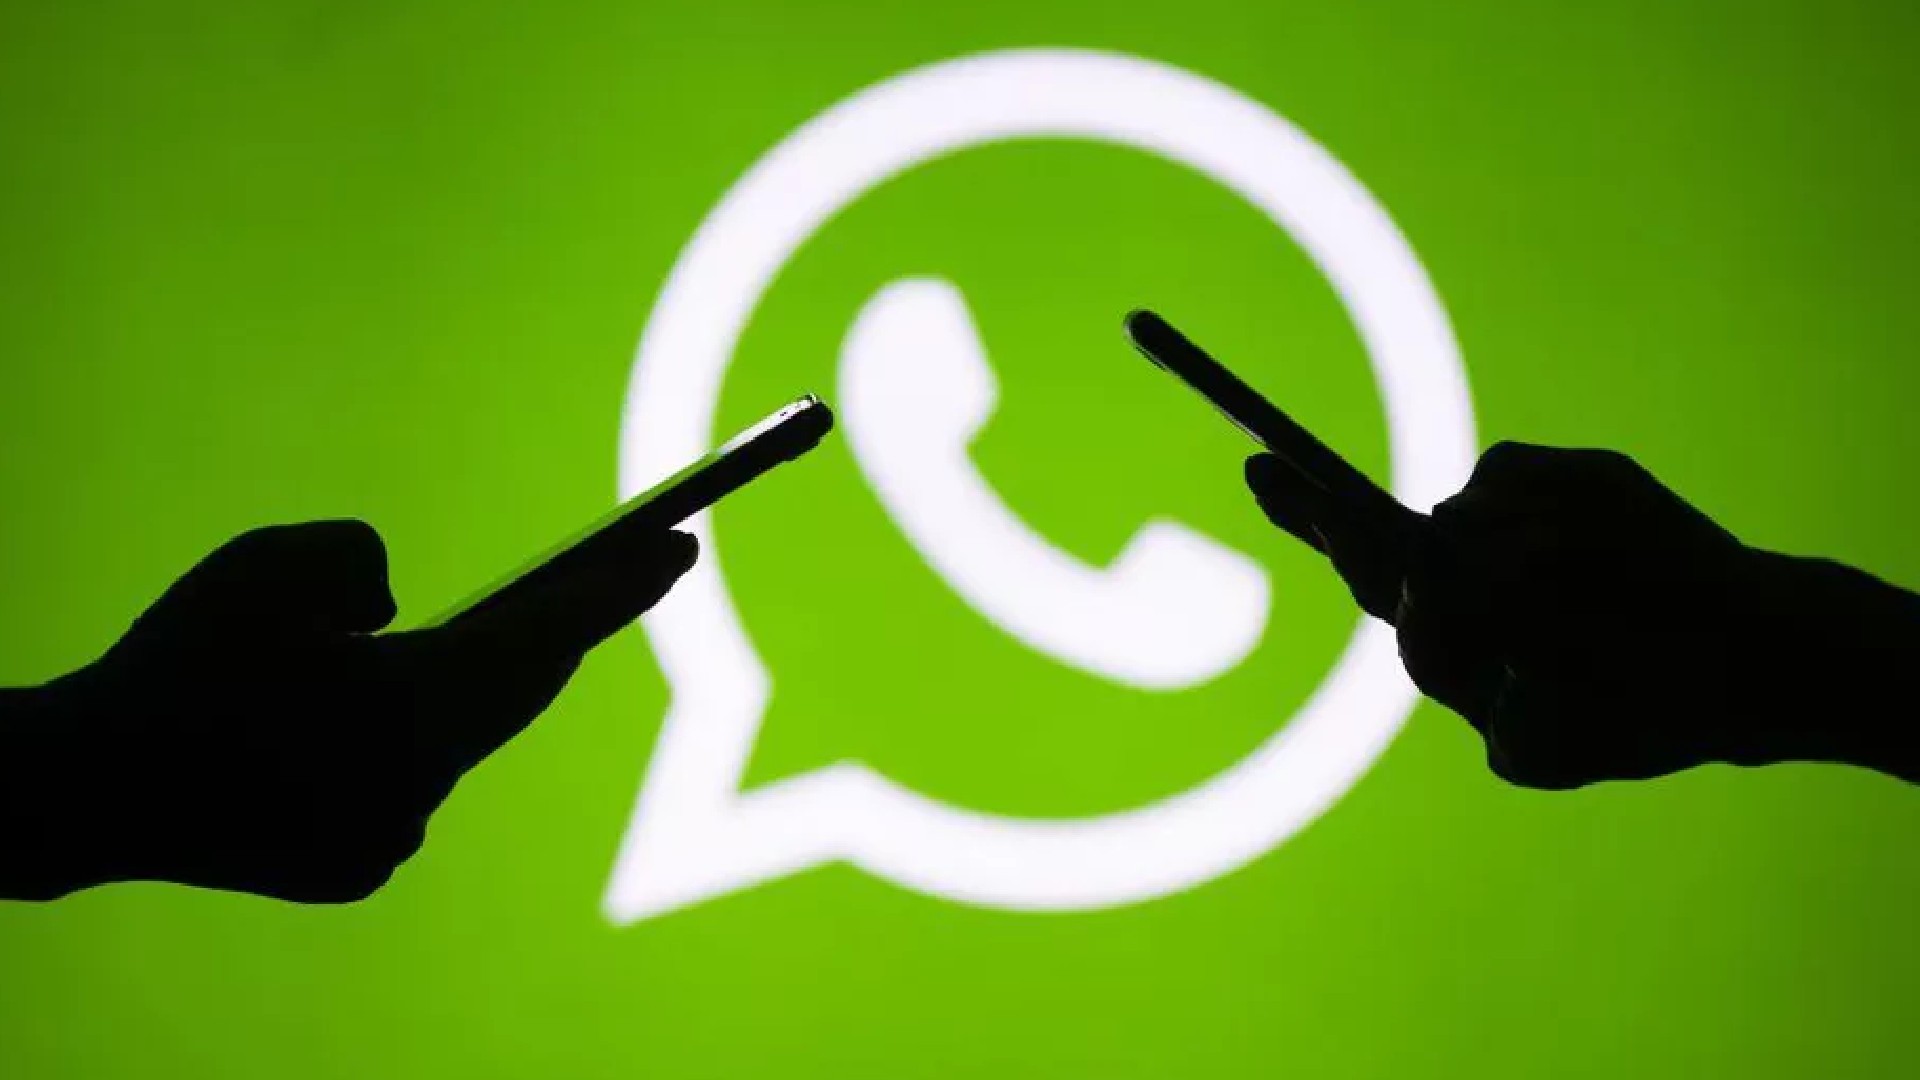 Protect Your WhatsApp Chats With Passwords! This Is How Chats Will Be Secured Via Encryption